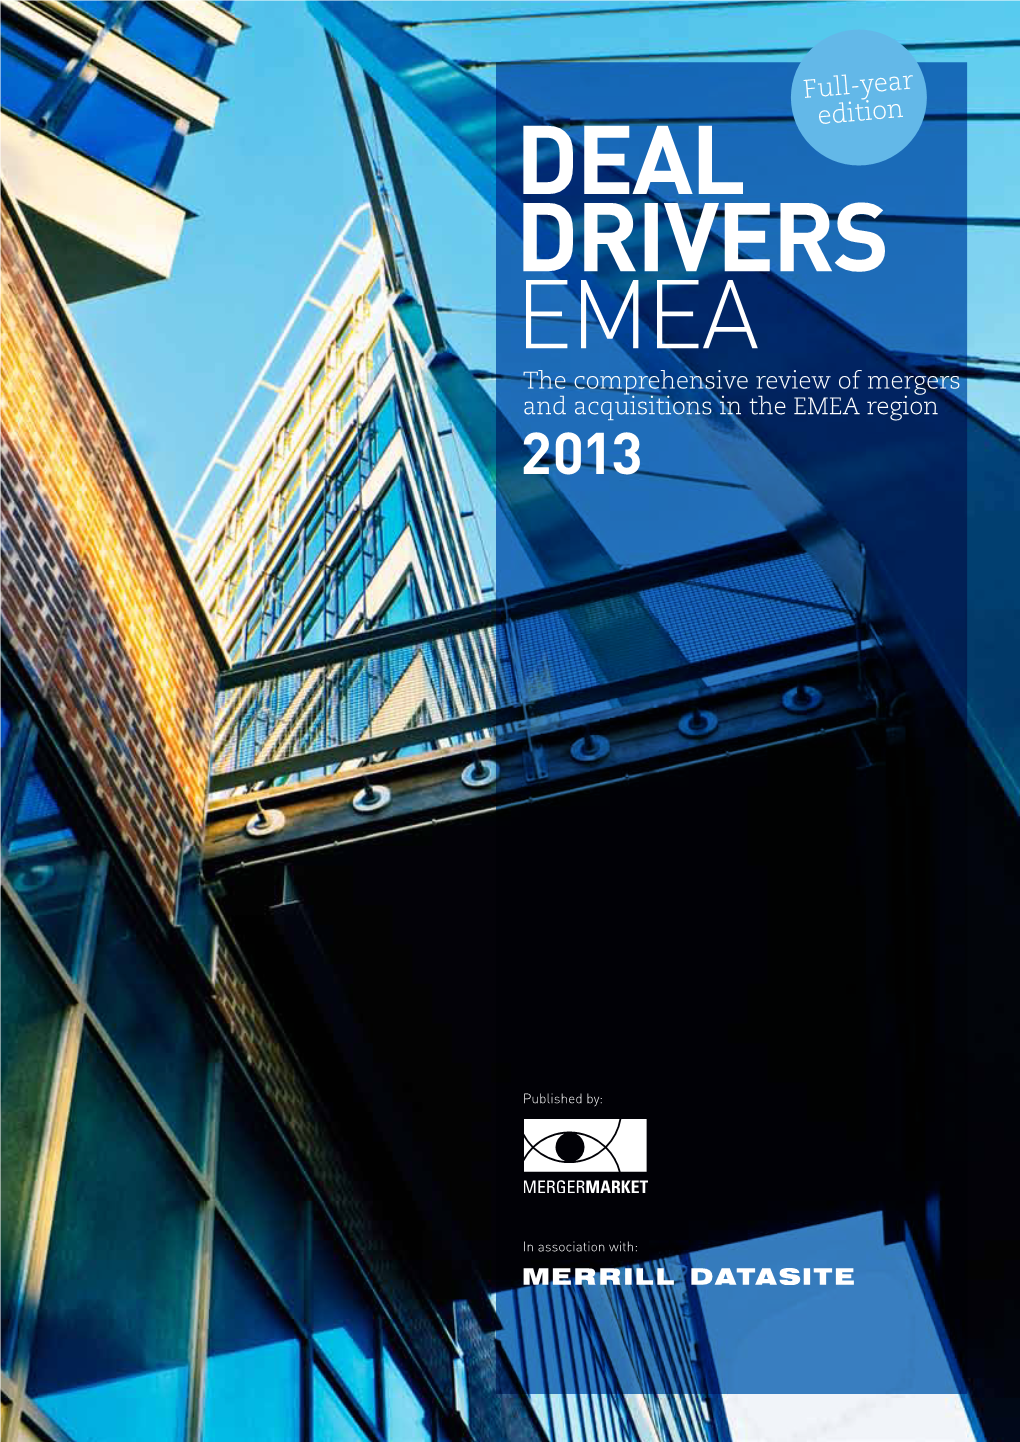 DEAL DRIVERS EMEA the Comprehensive Review of Mergers and Acquisitions in the EMEA Region 2013